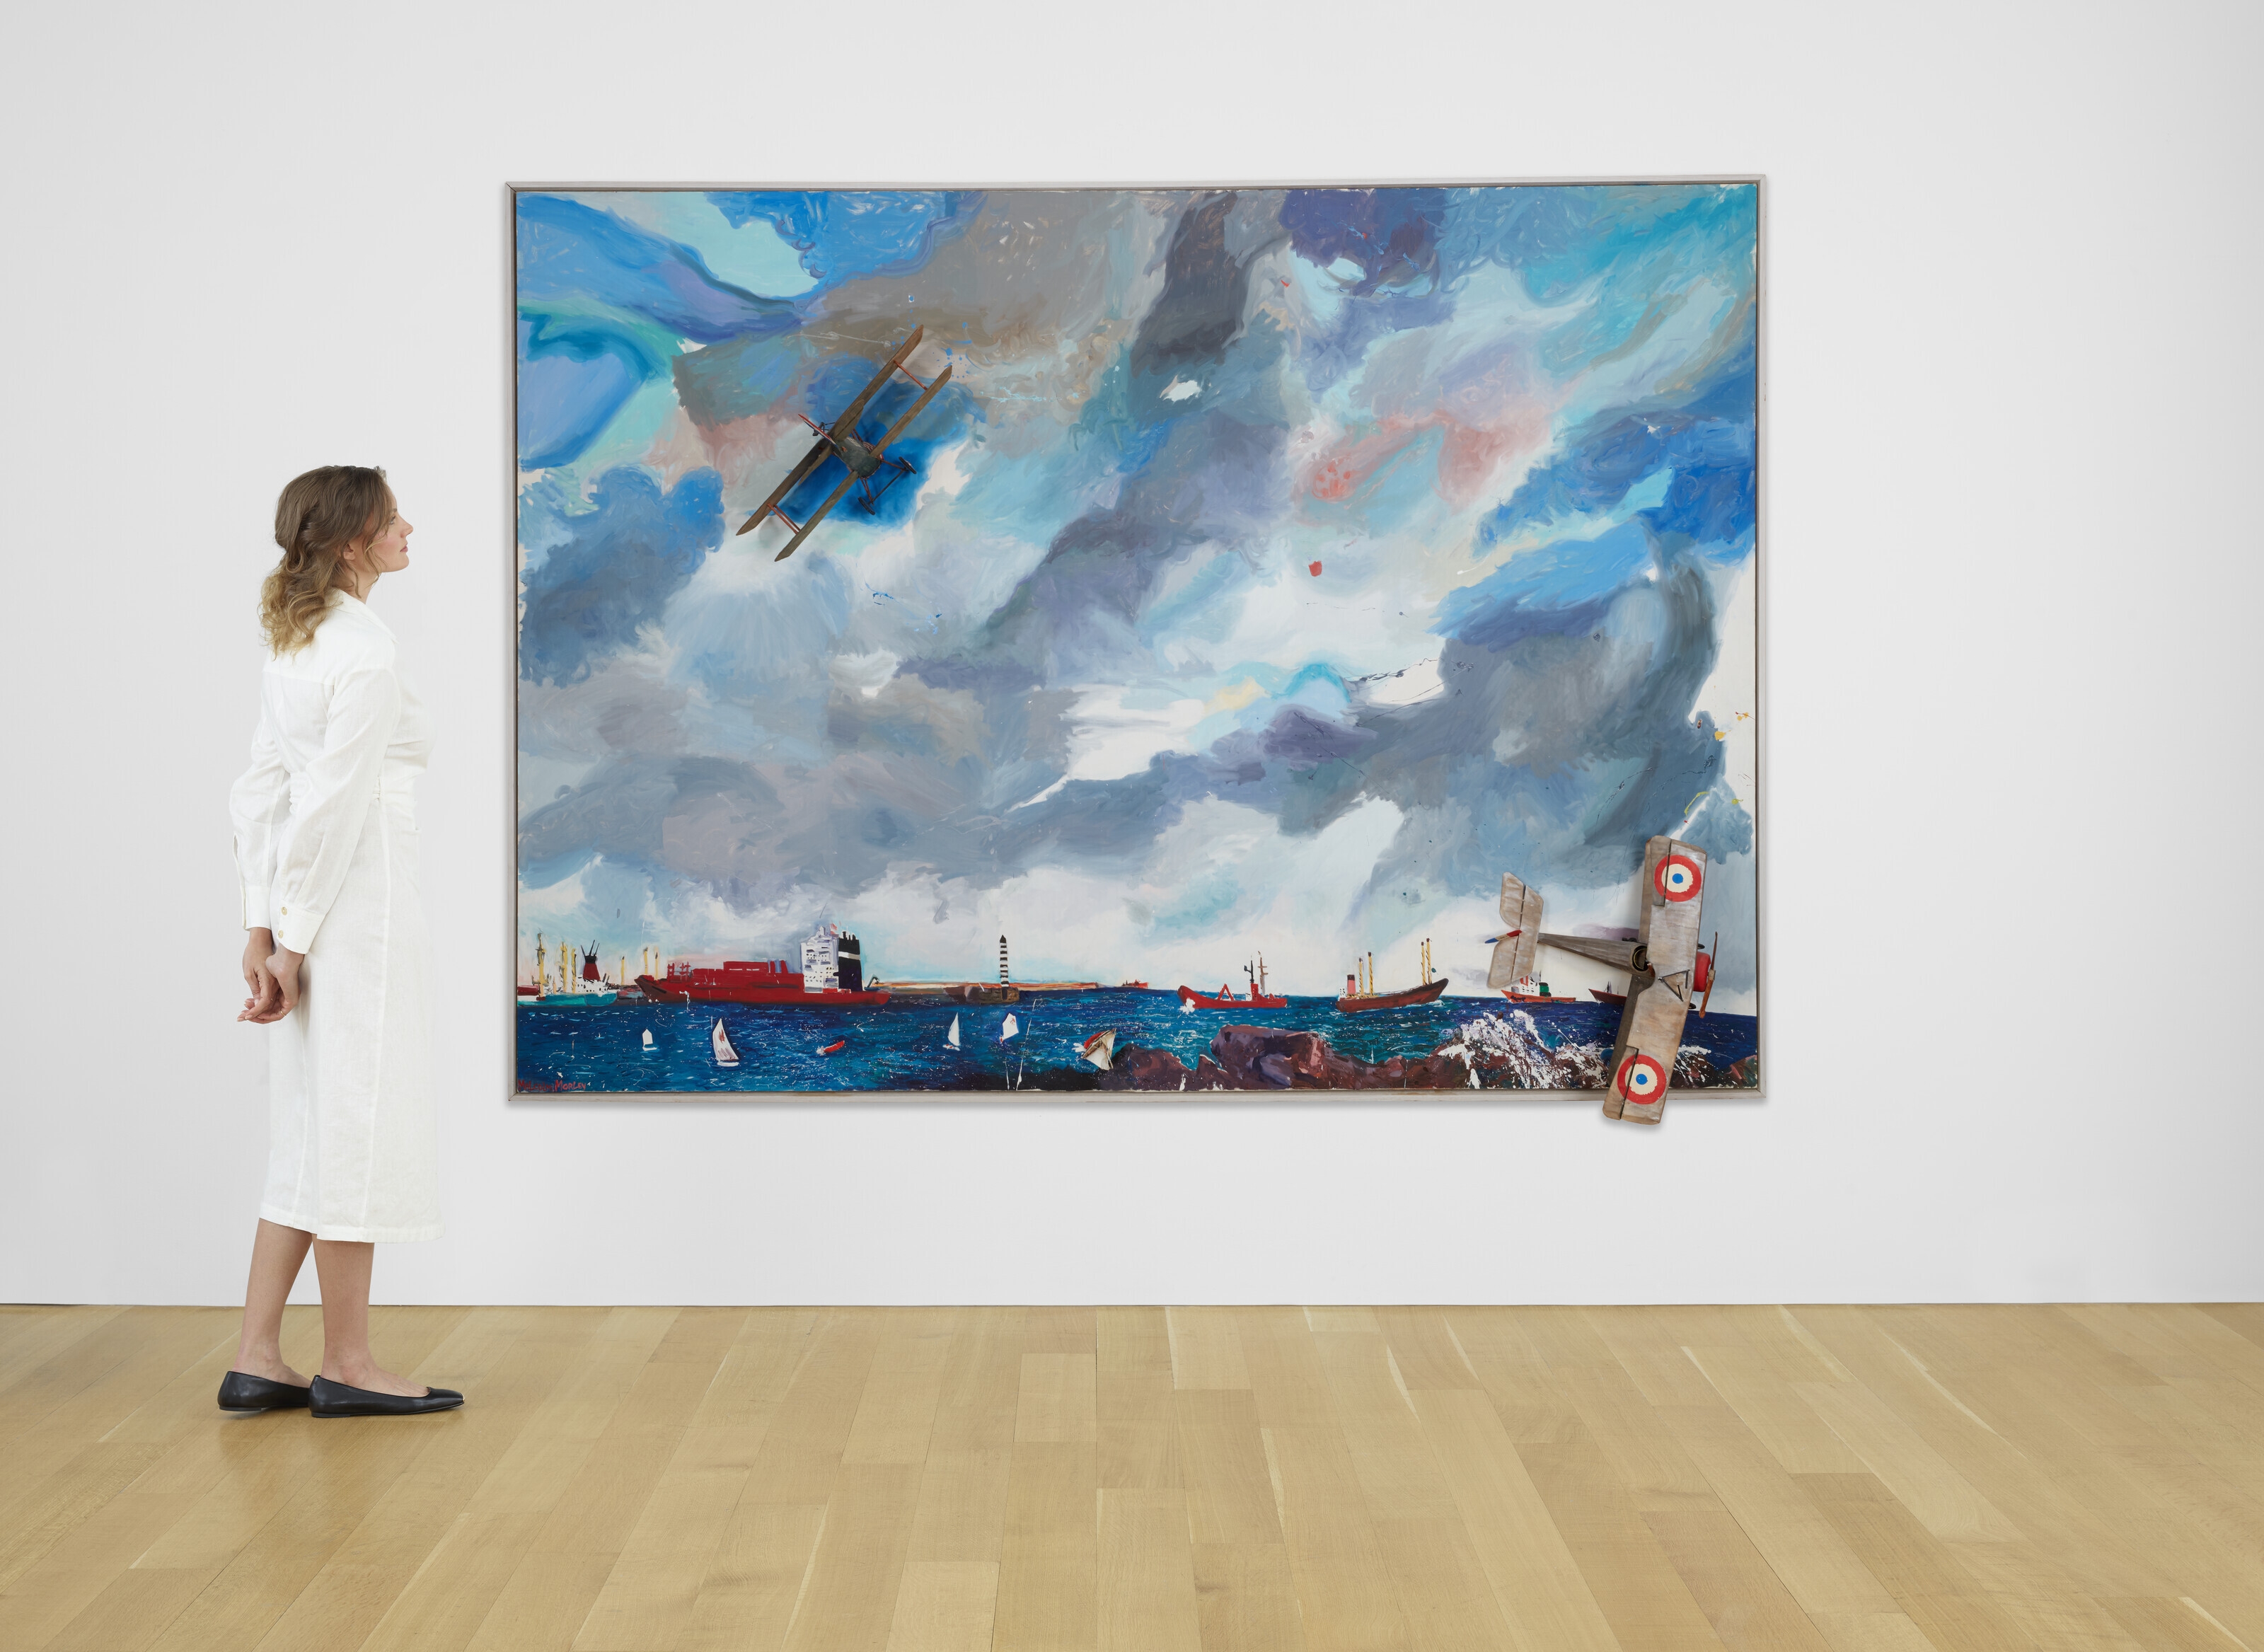 Artwork by Malcolm Morley, Icarus, Made of oil on canvas with painted paper airplanes and boat, with electric motor